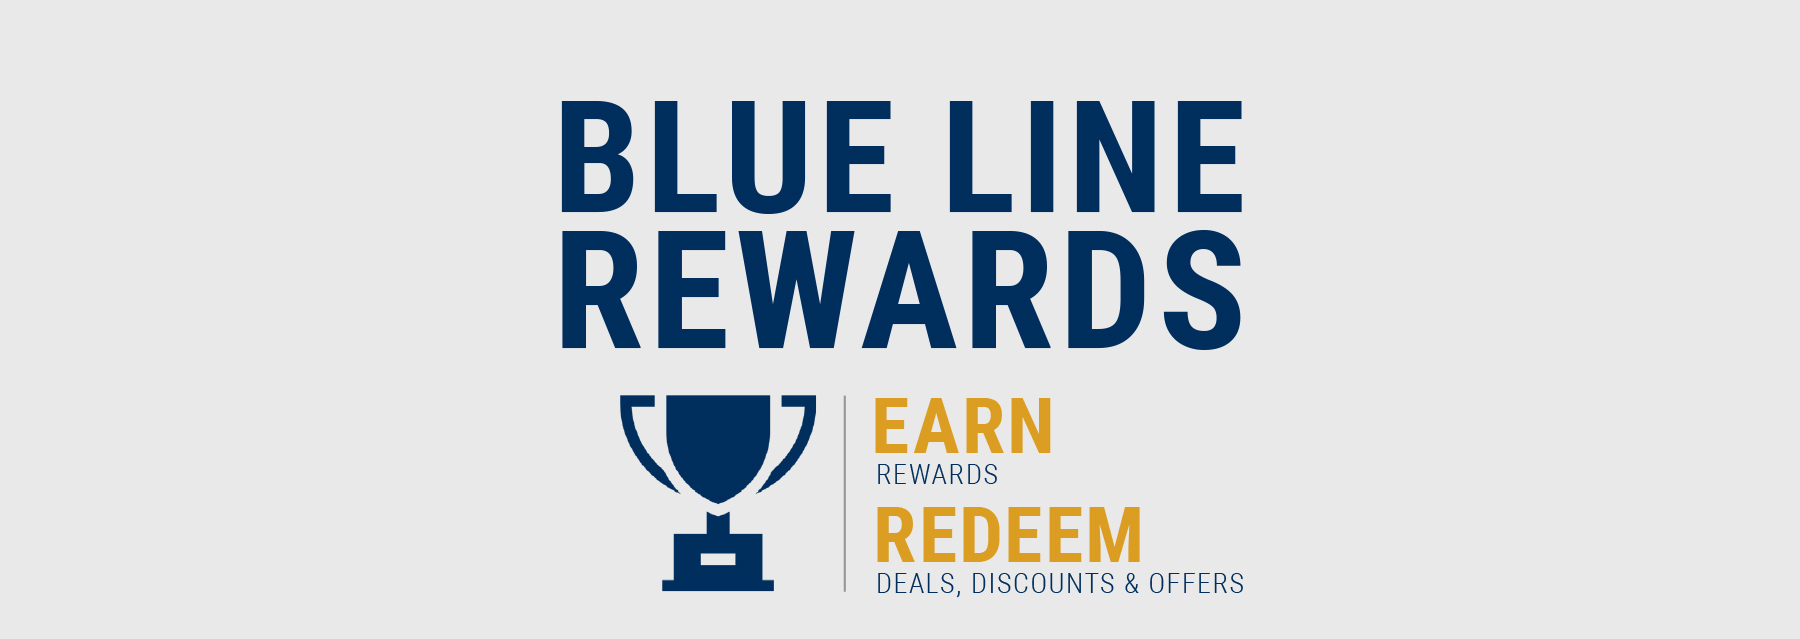 Blue Line Rewards - Earn Rewards and Redeem for deals, discounts and offers